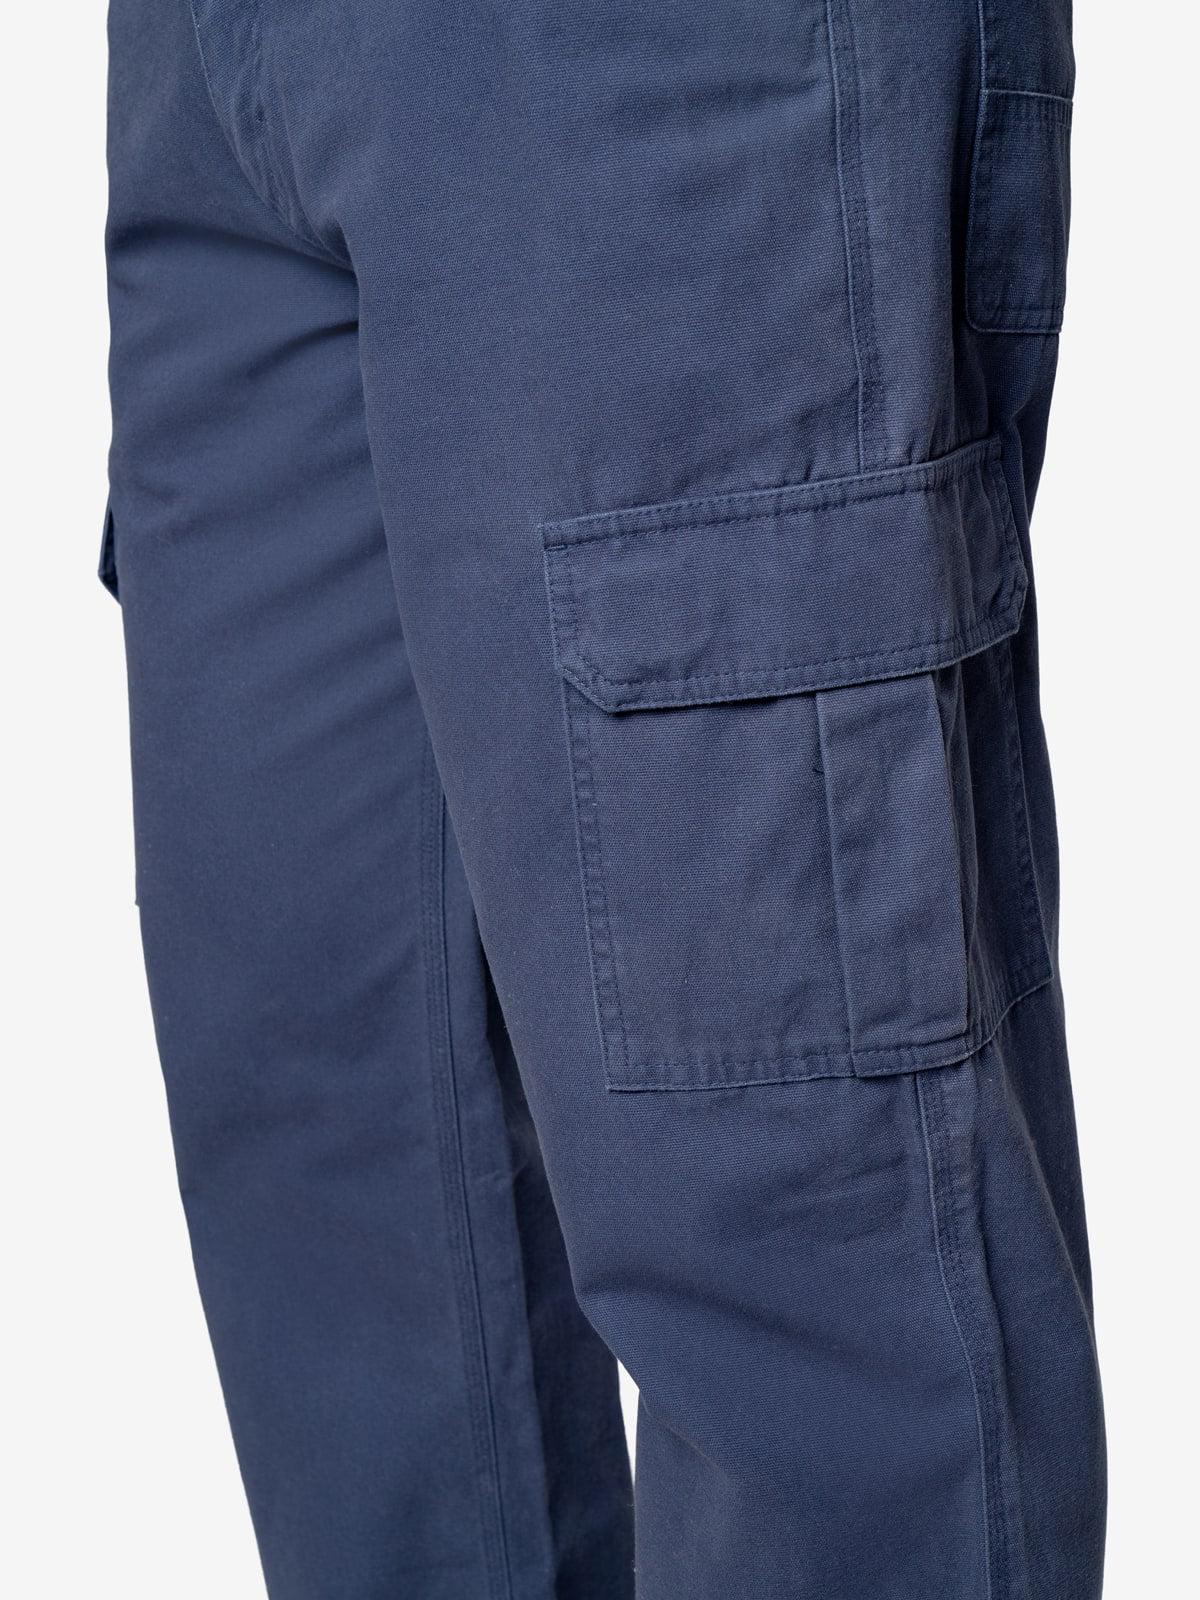 Insect Shield Men's Cargo Pants